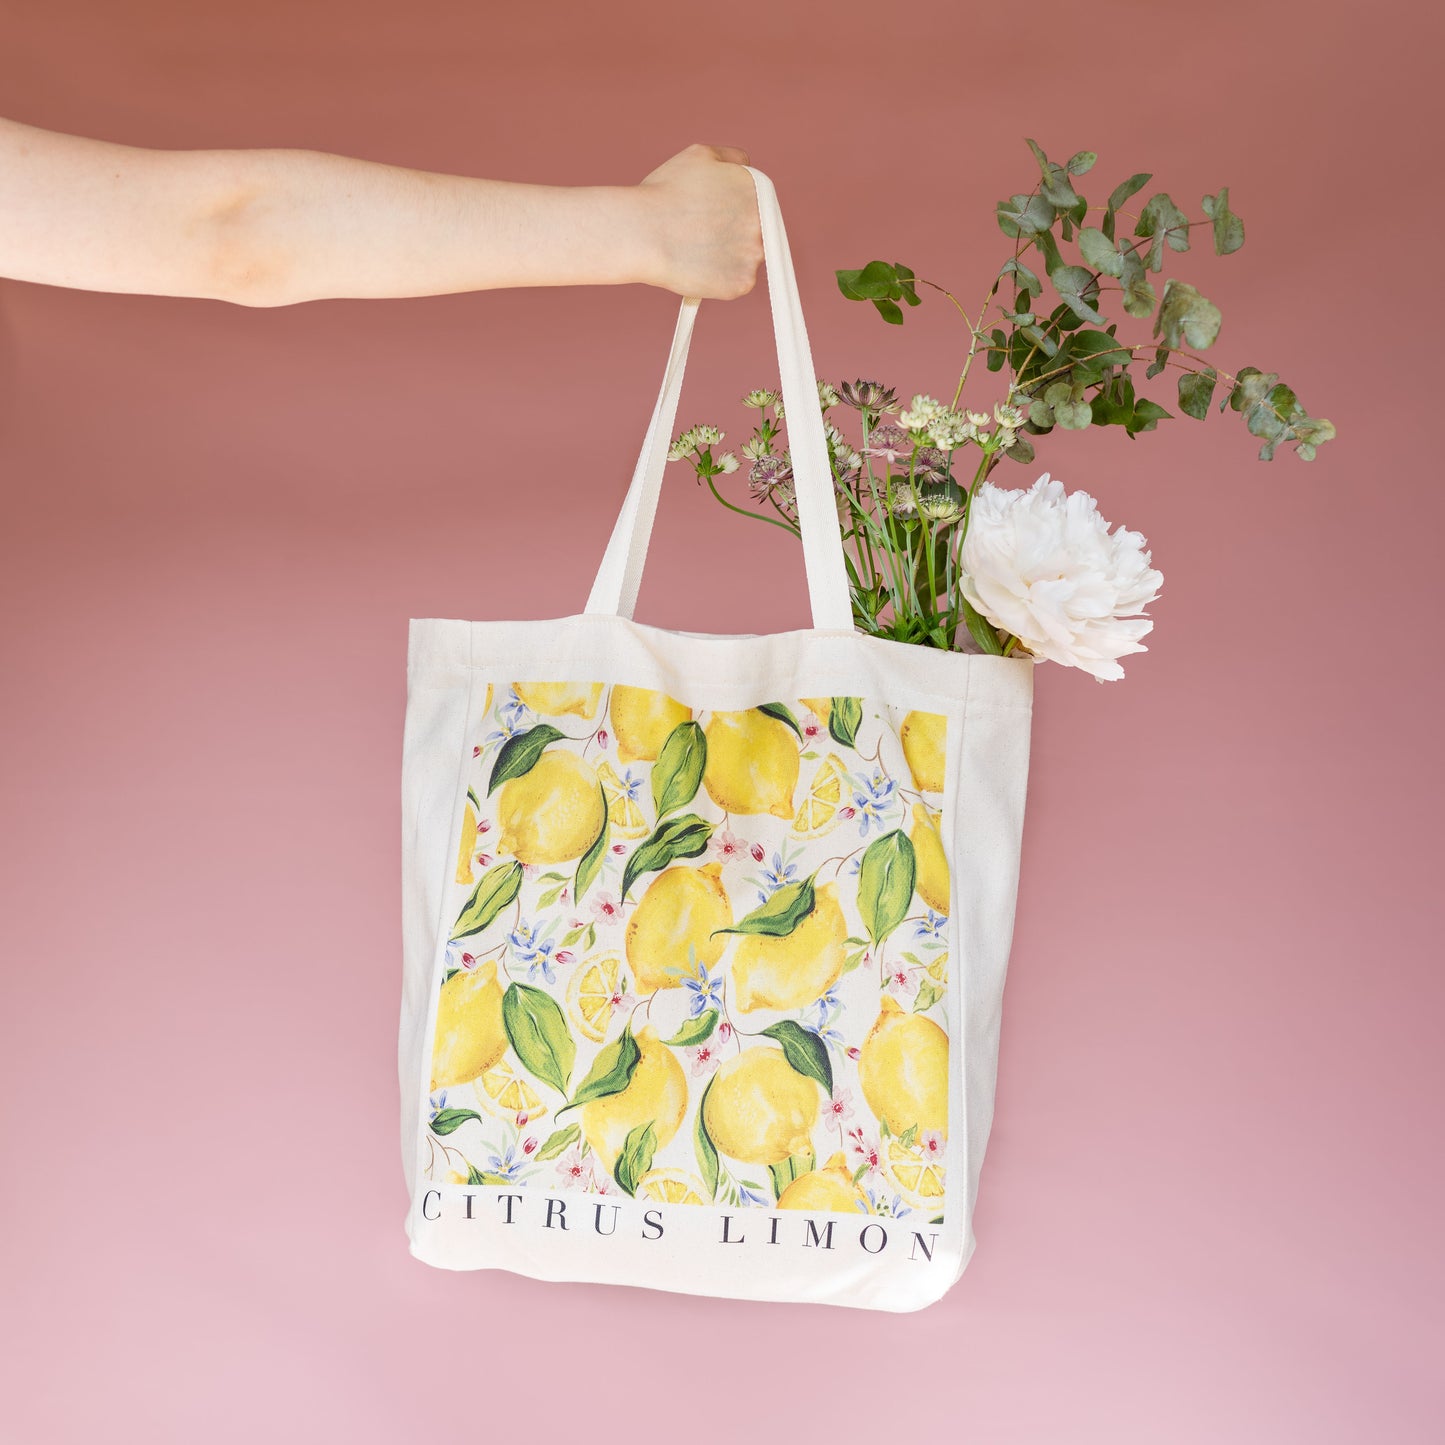 tote bag holding farmers market flowers